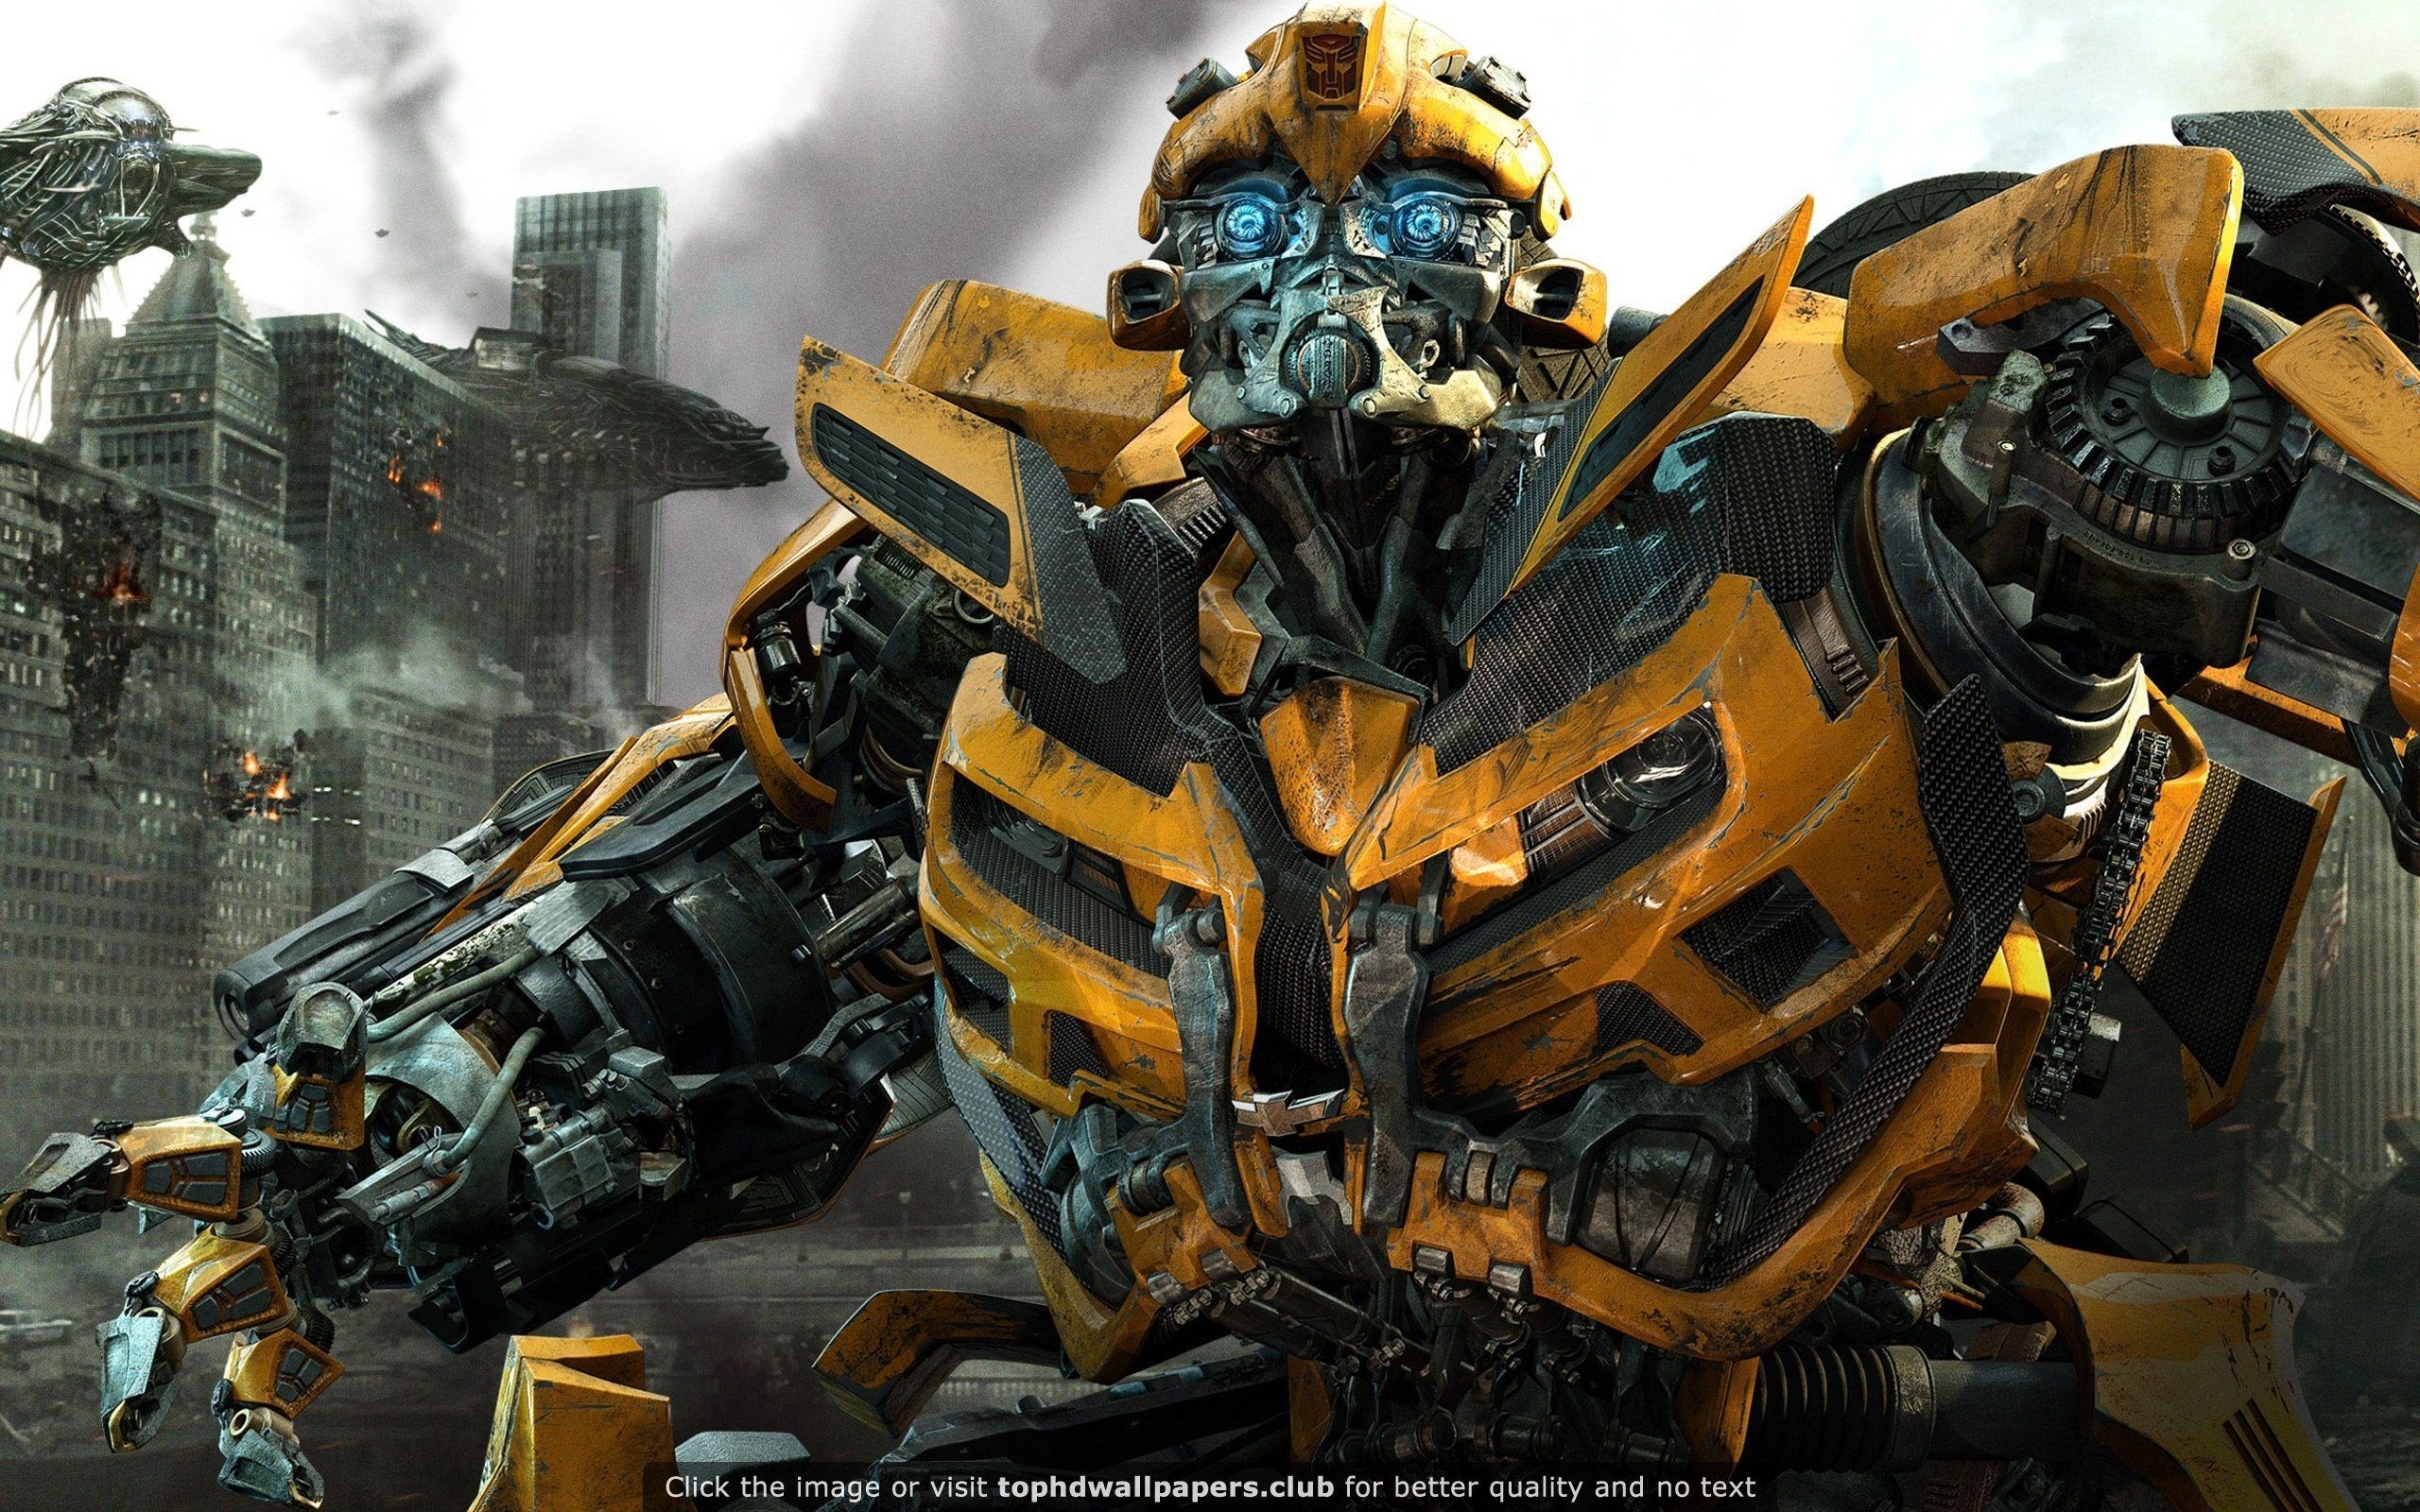 Related Post - Bumblebee Transformer , HD Wallpaper & Backgrounds